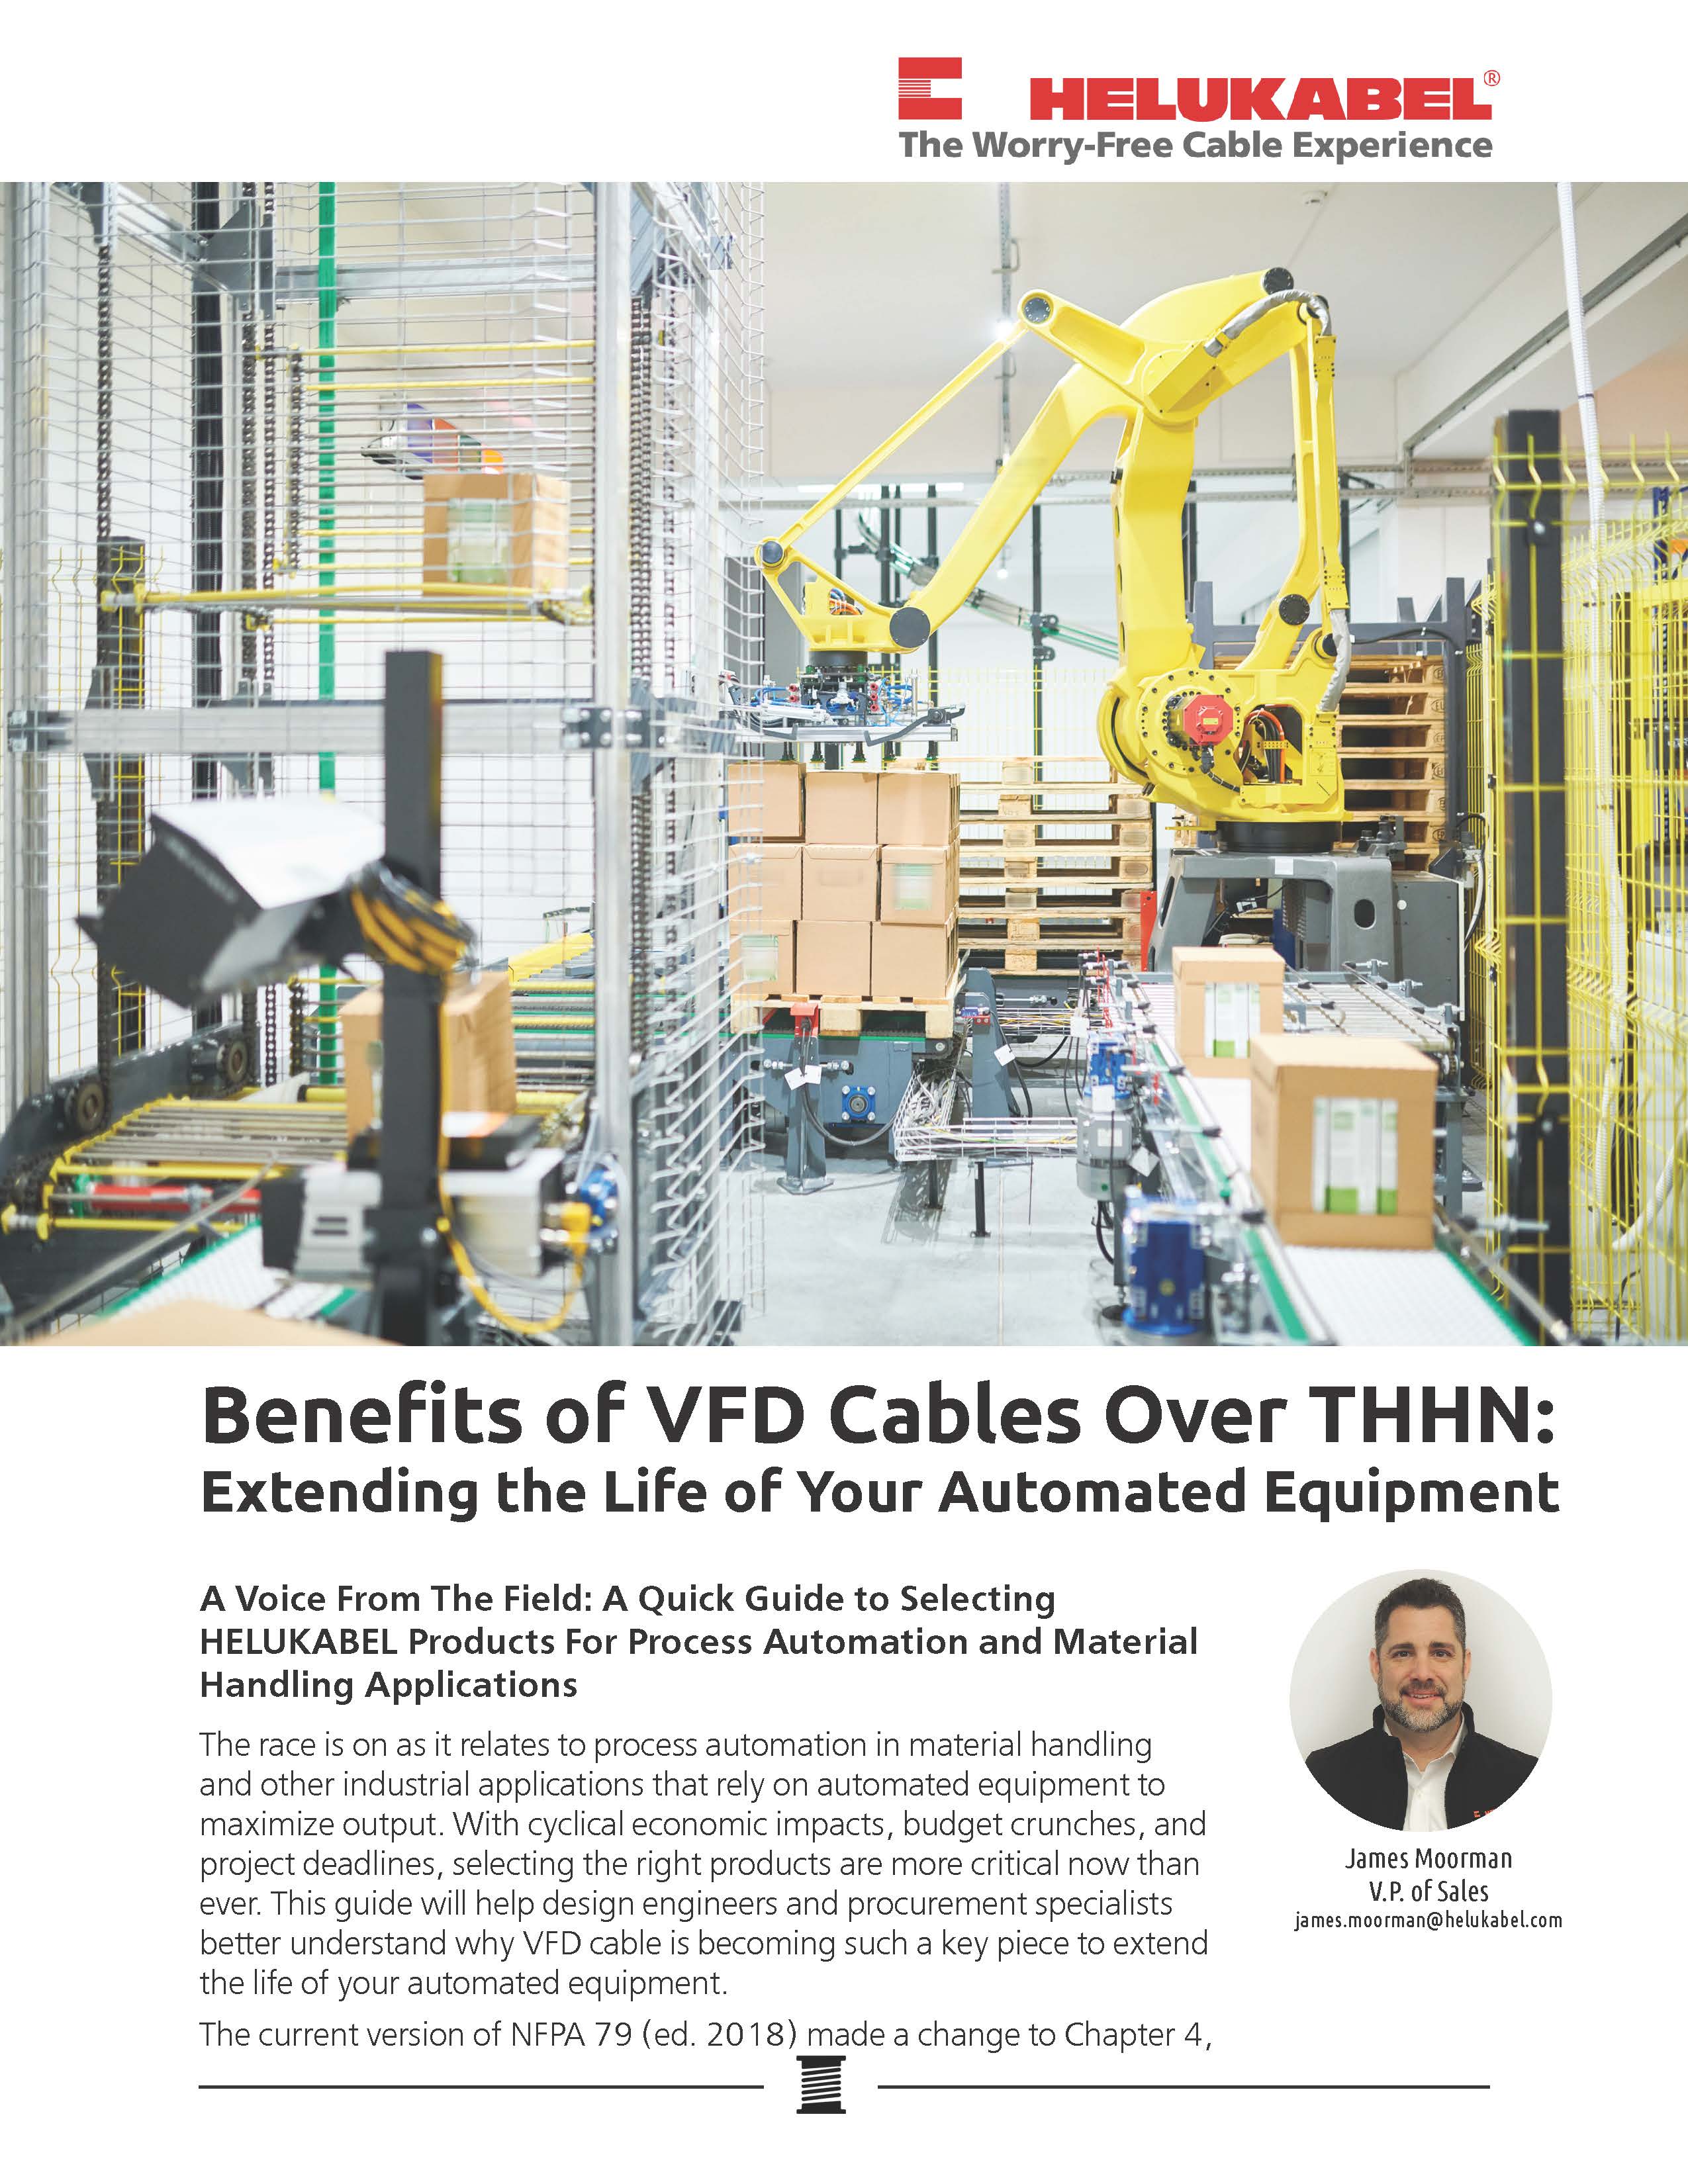 Benefits of VFD Cables Over THHN: Extending the Life of Your Automated Equipment